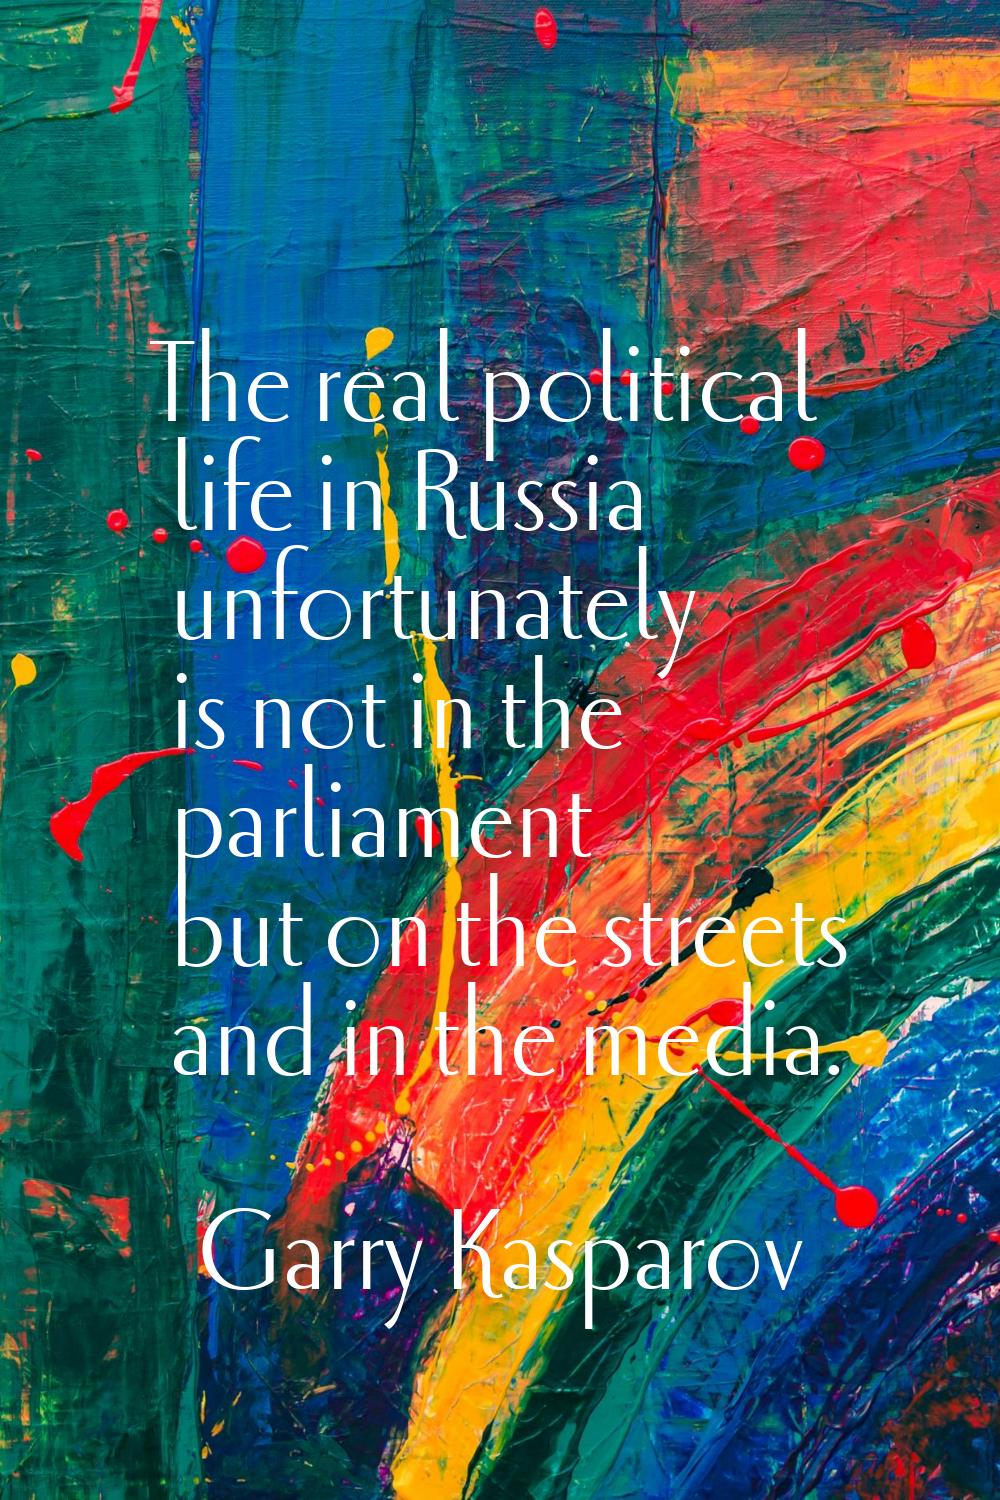 The real political life in Russia unfortunately is not in the parliament but on the streets and in 